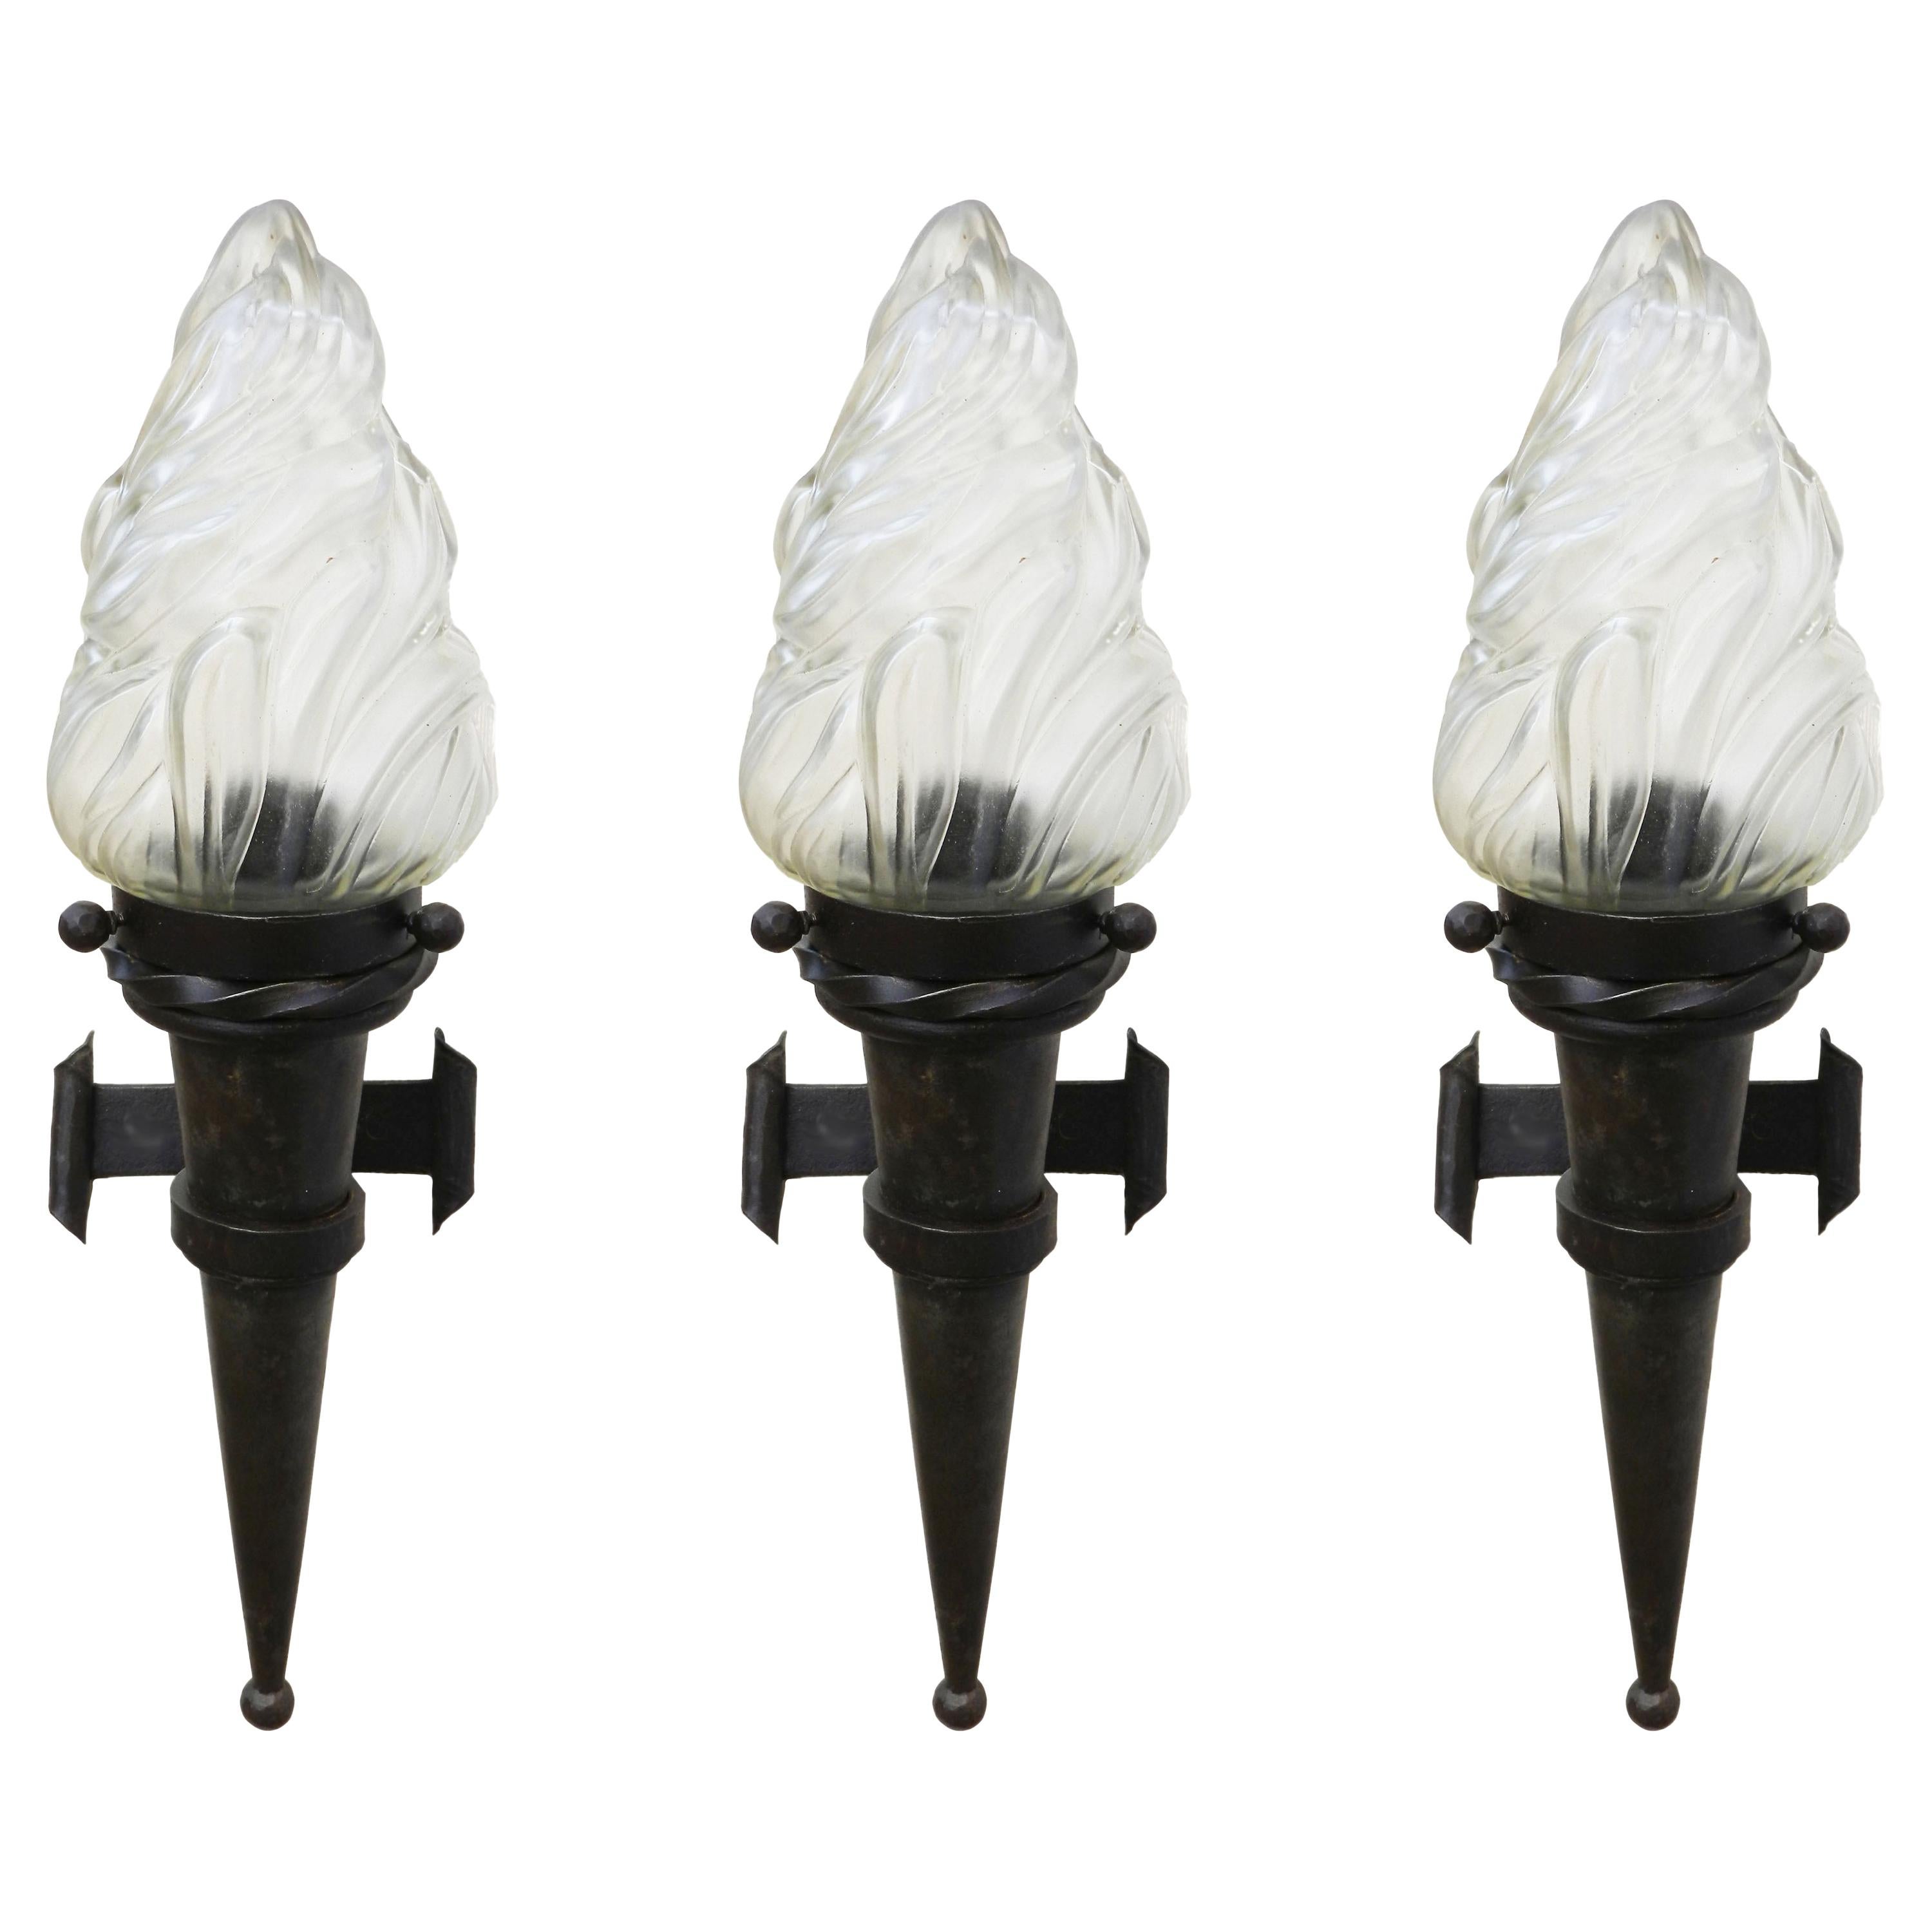 Three Flame Sconces Wall Lights Large Forged Iron Glass French, c1930 Sell Sep